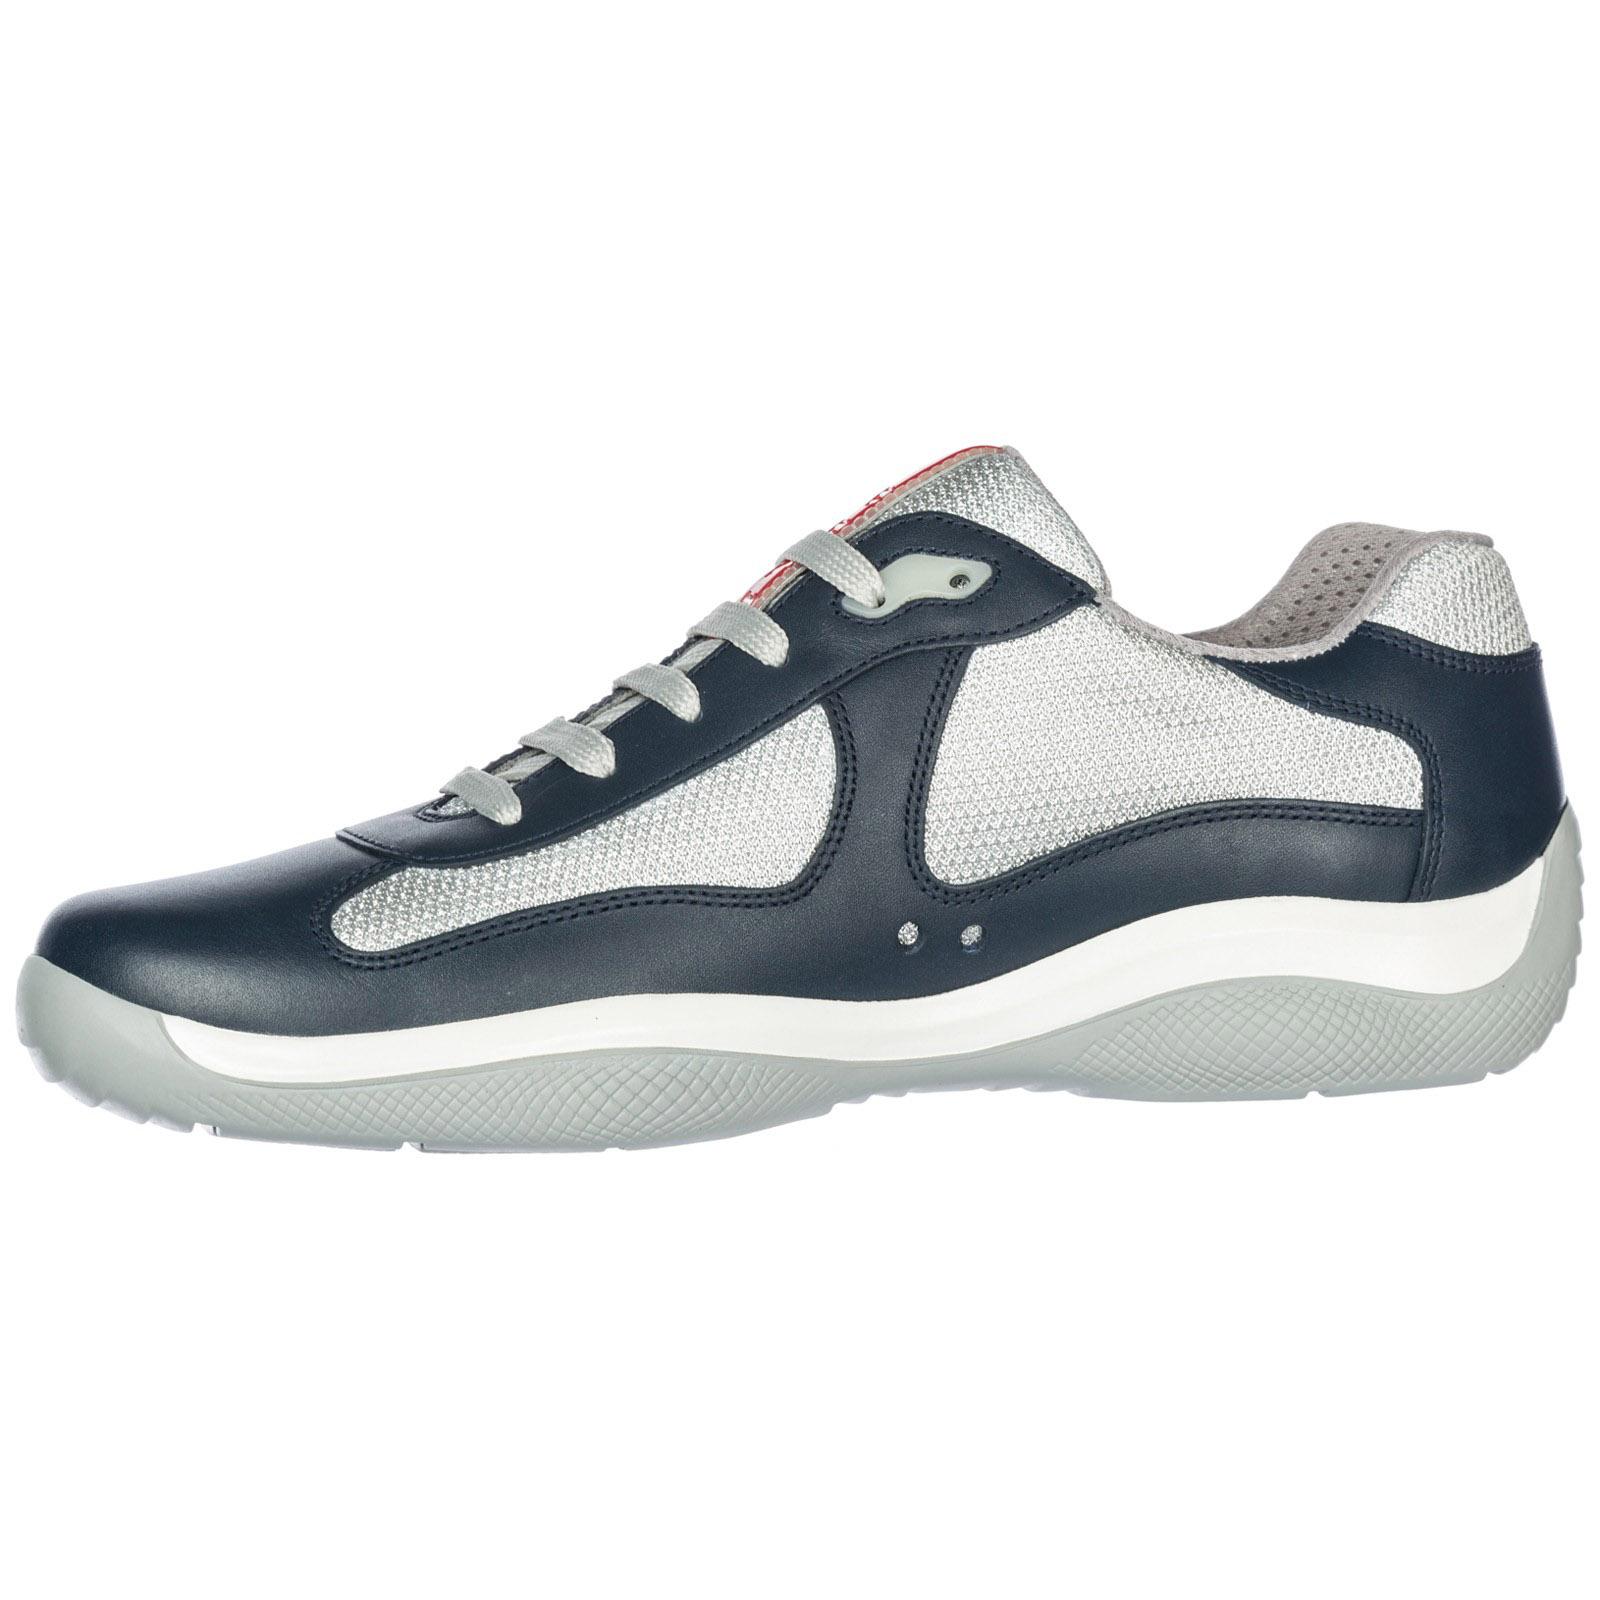 Prada Leather America's Cup Bike Sneakers in Blue for Men - Save 60% | Lyst